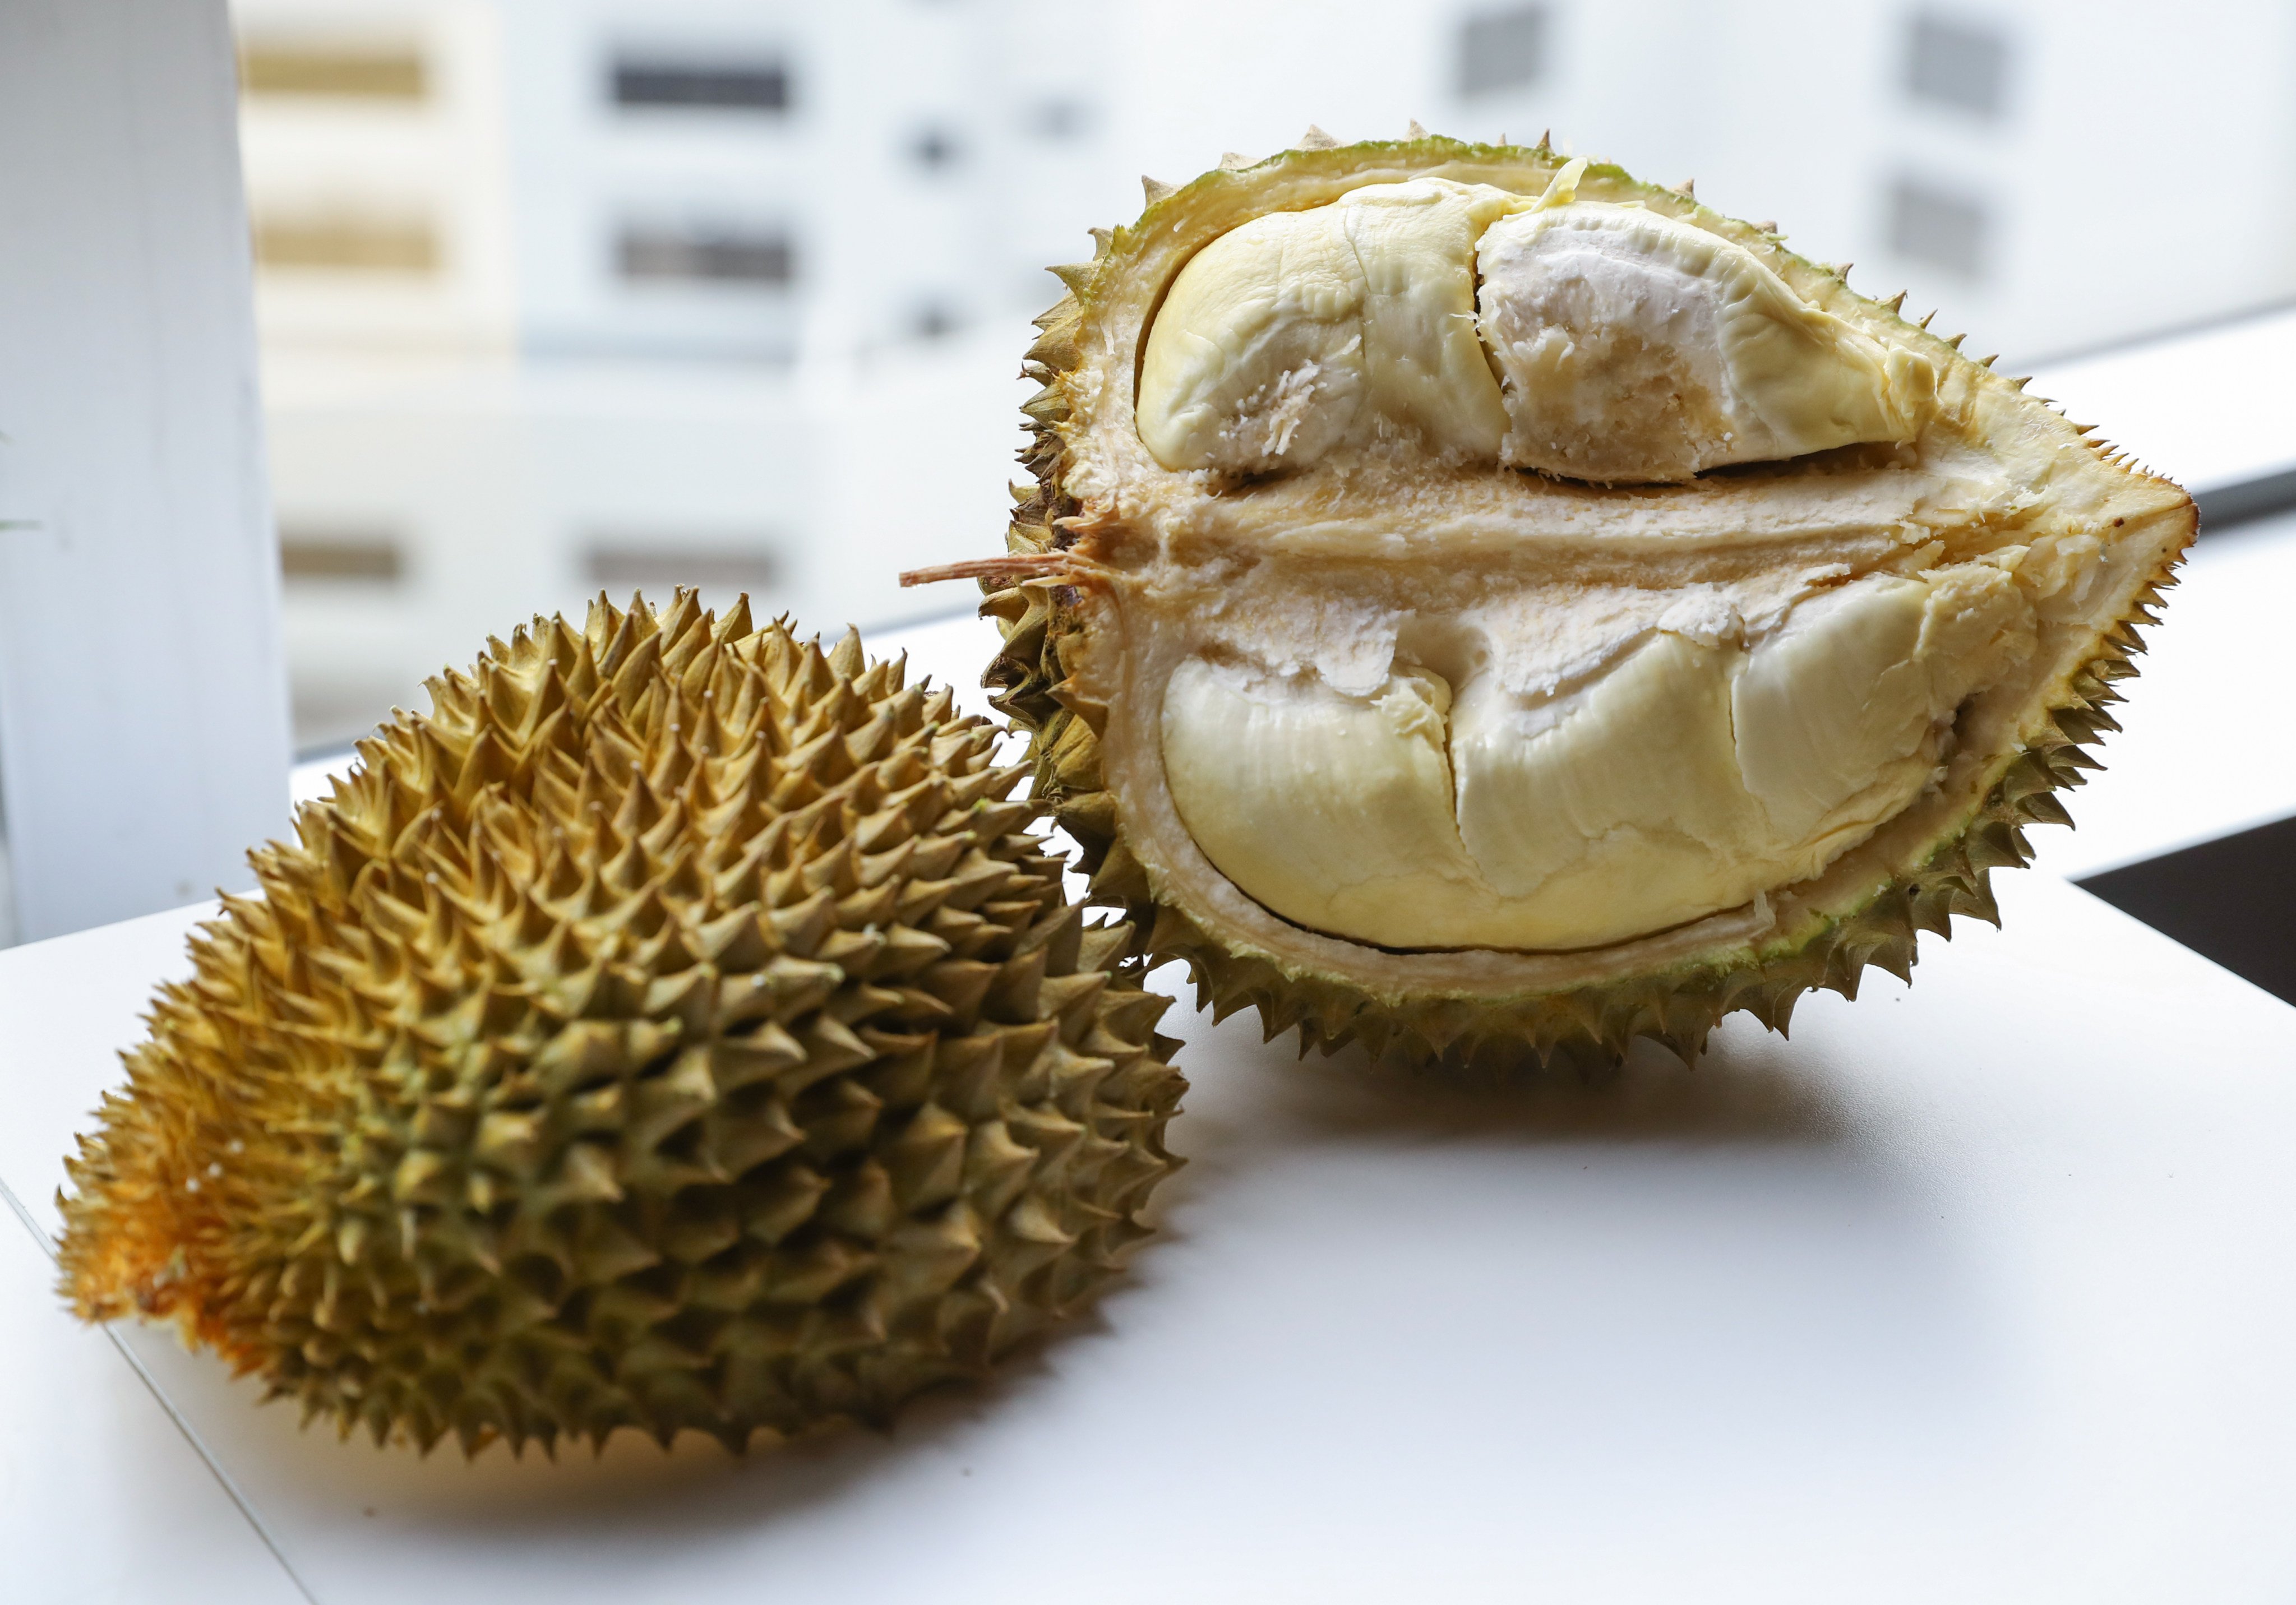 One of China’s first home-grown durians - we evaluate its taste, texture and smell. Photo: Sun Yeung